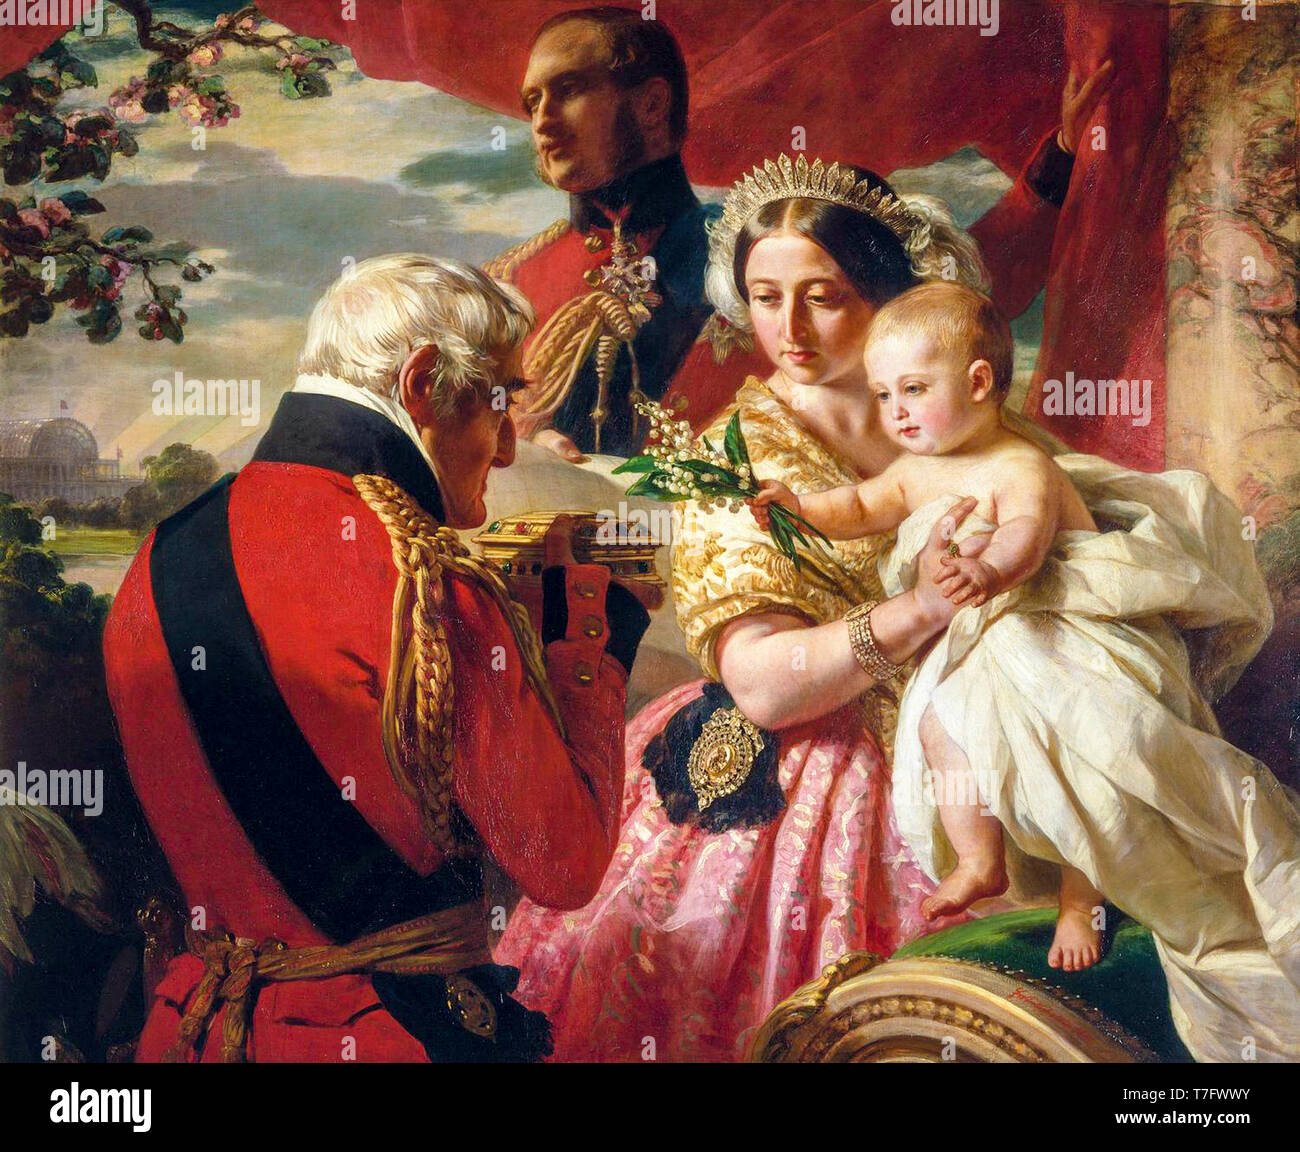 The First of May 1851, Queen Victoria family portrait painting by Franz Xaver Winterhalter,1851 Stock Photo